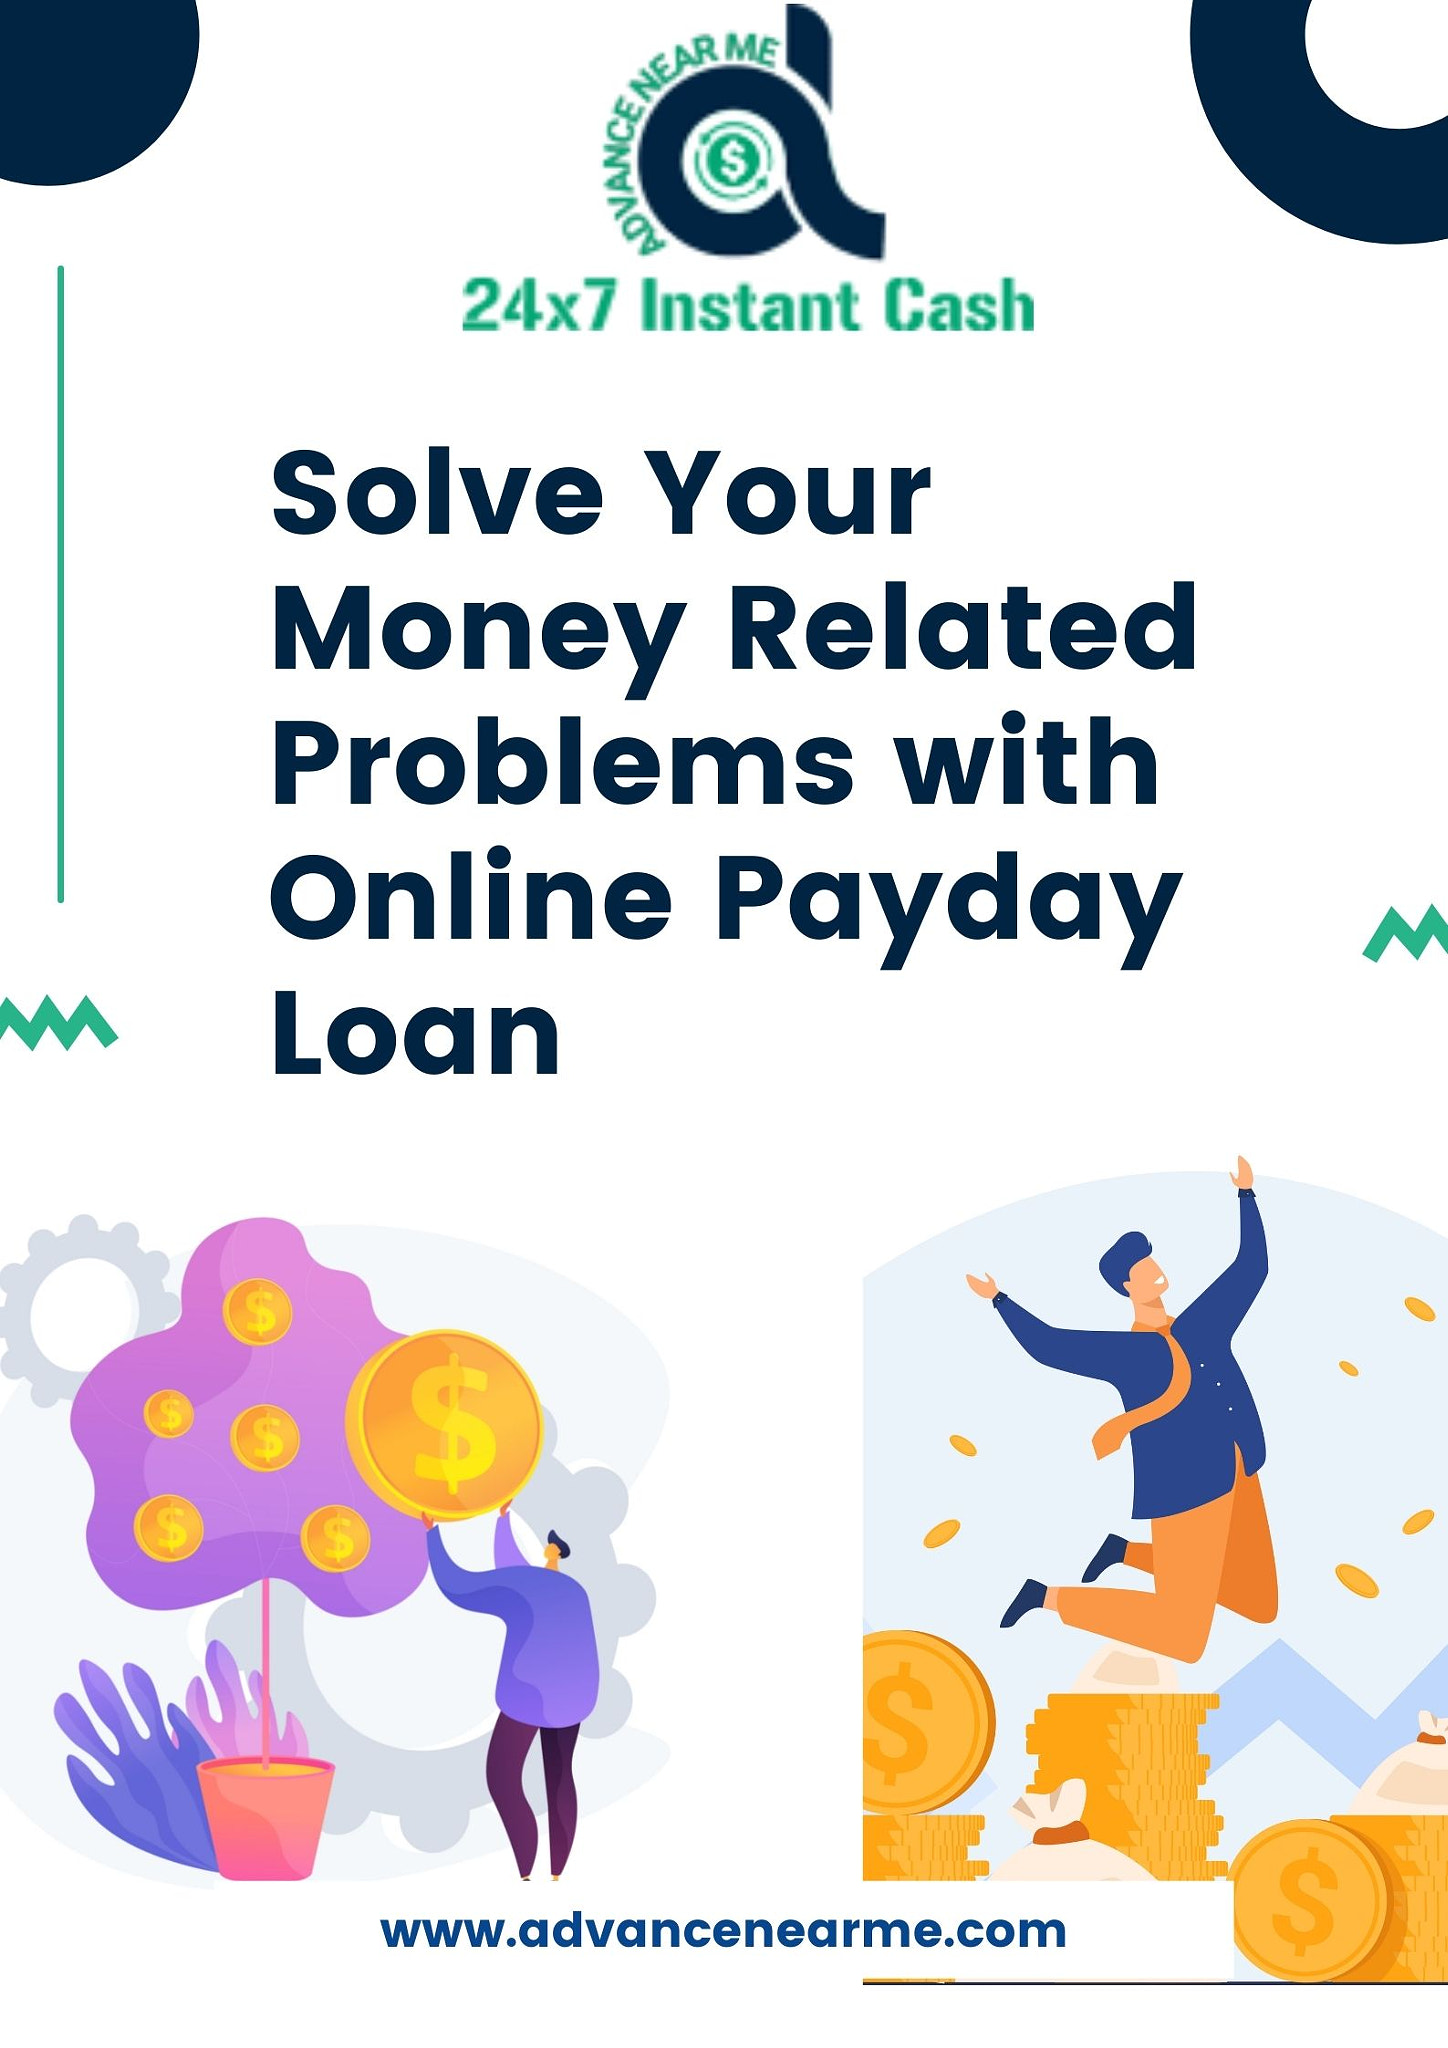 Solve Your Money Related Problems with Online Payday Loan